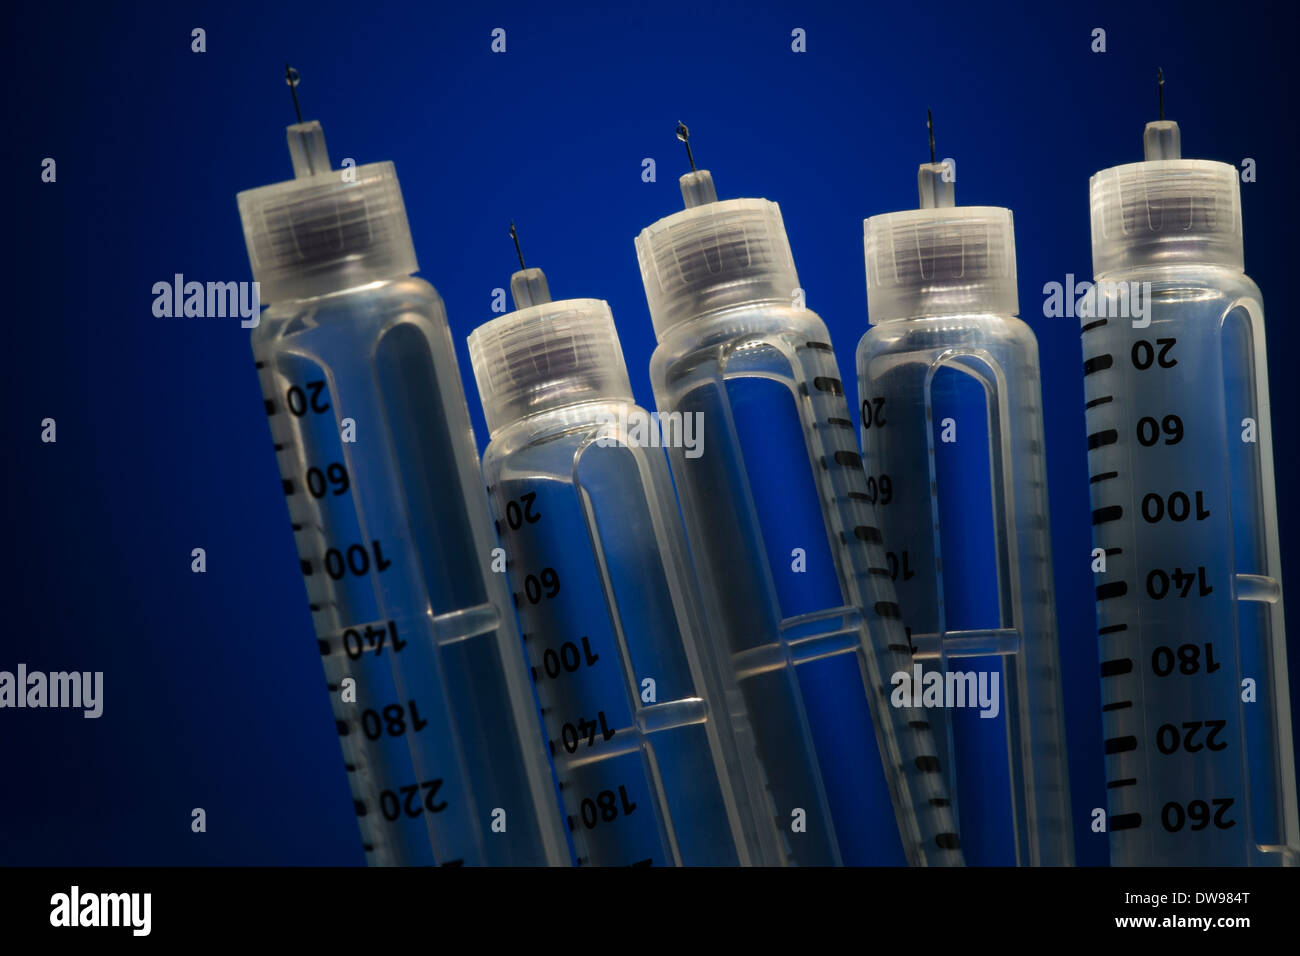 insulin injection pens on blue background Stock Photo